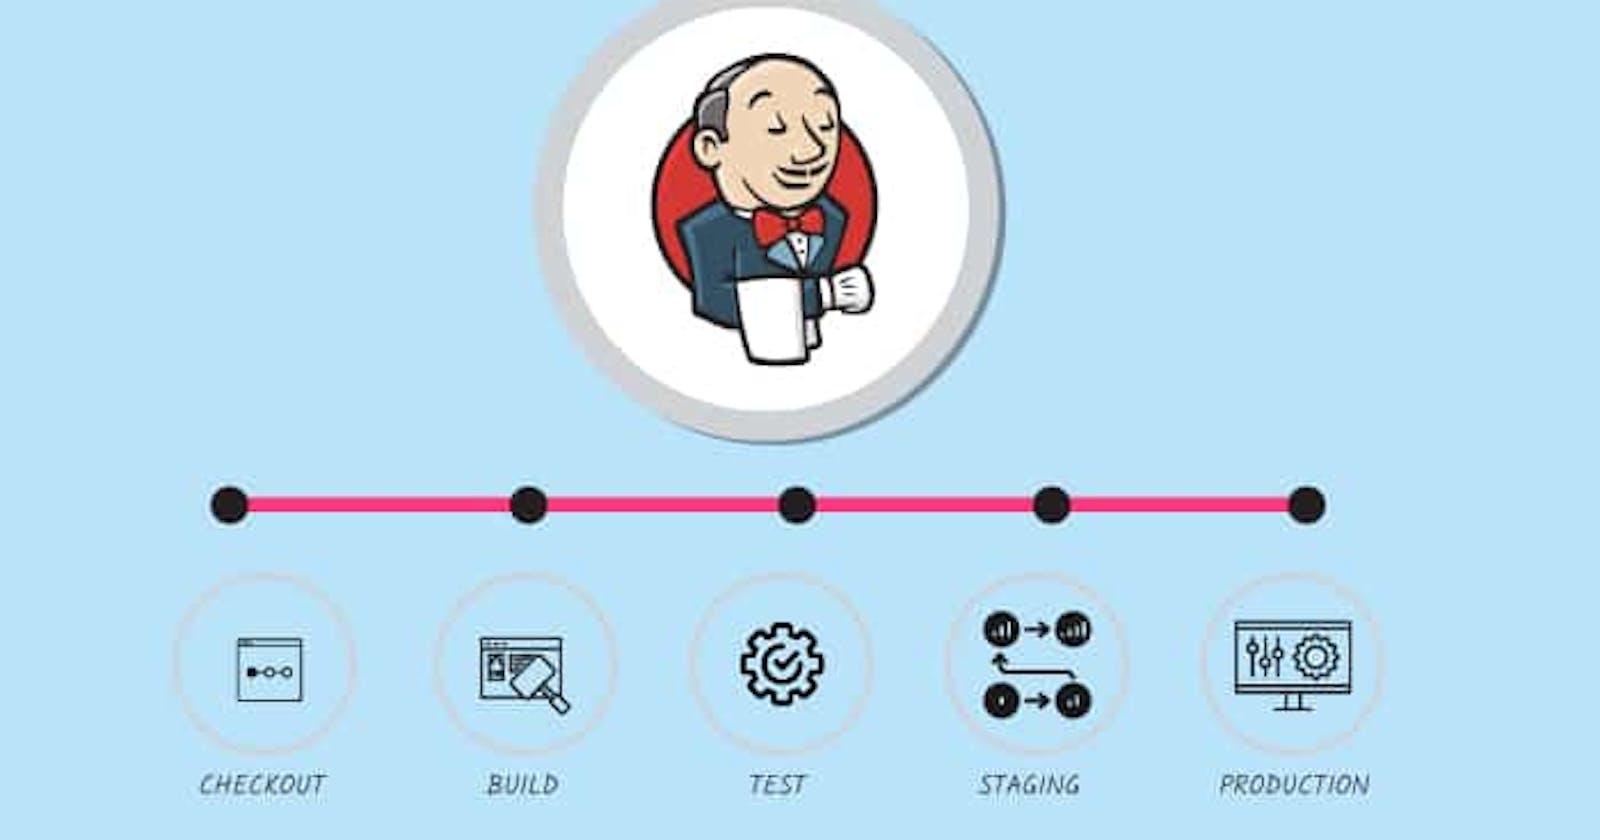 Jenkins Distributed Builds: Configuring Master and Slave Nodes